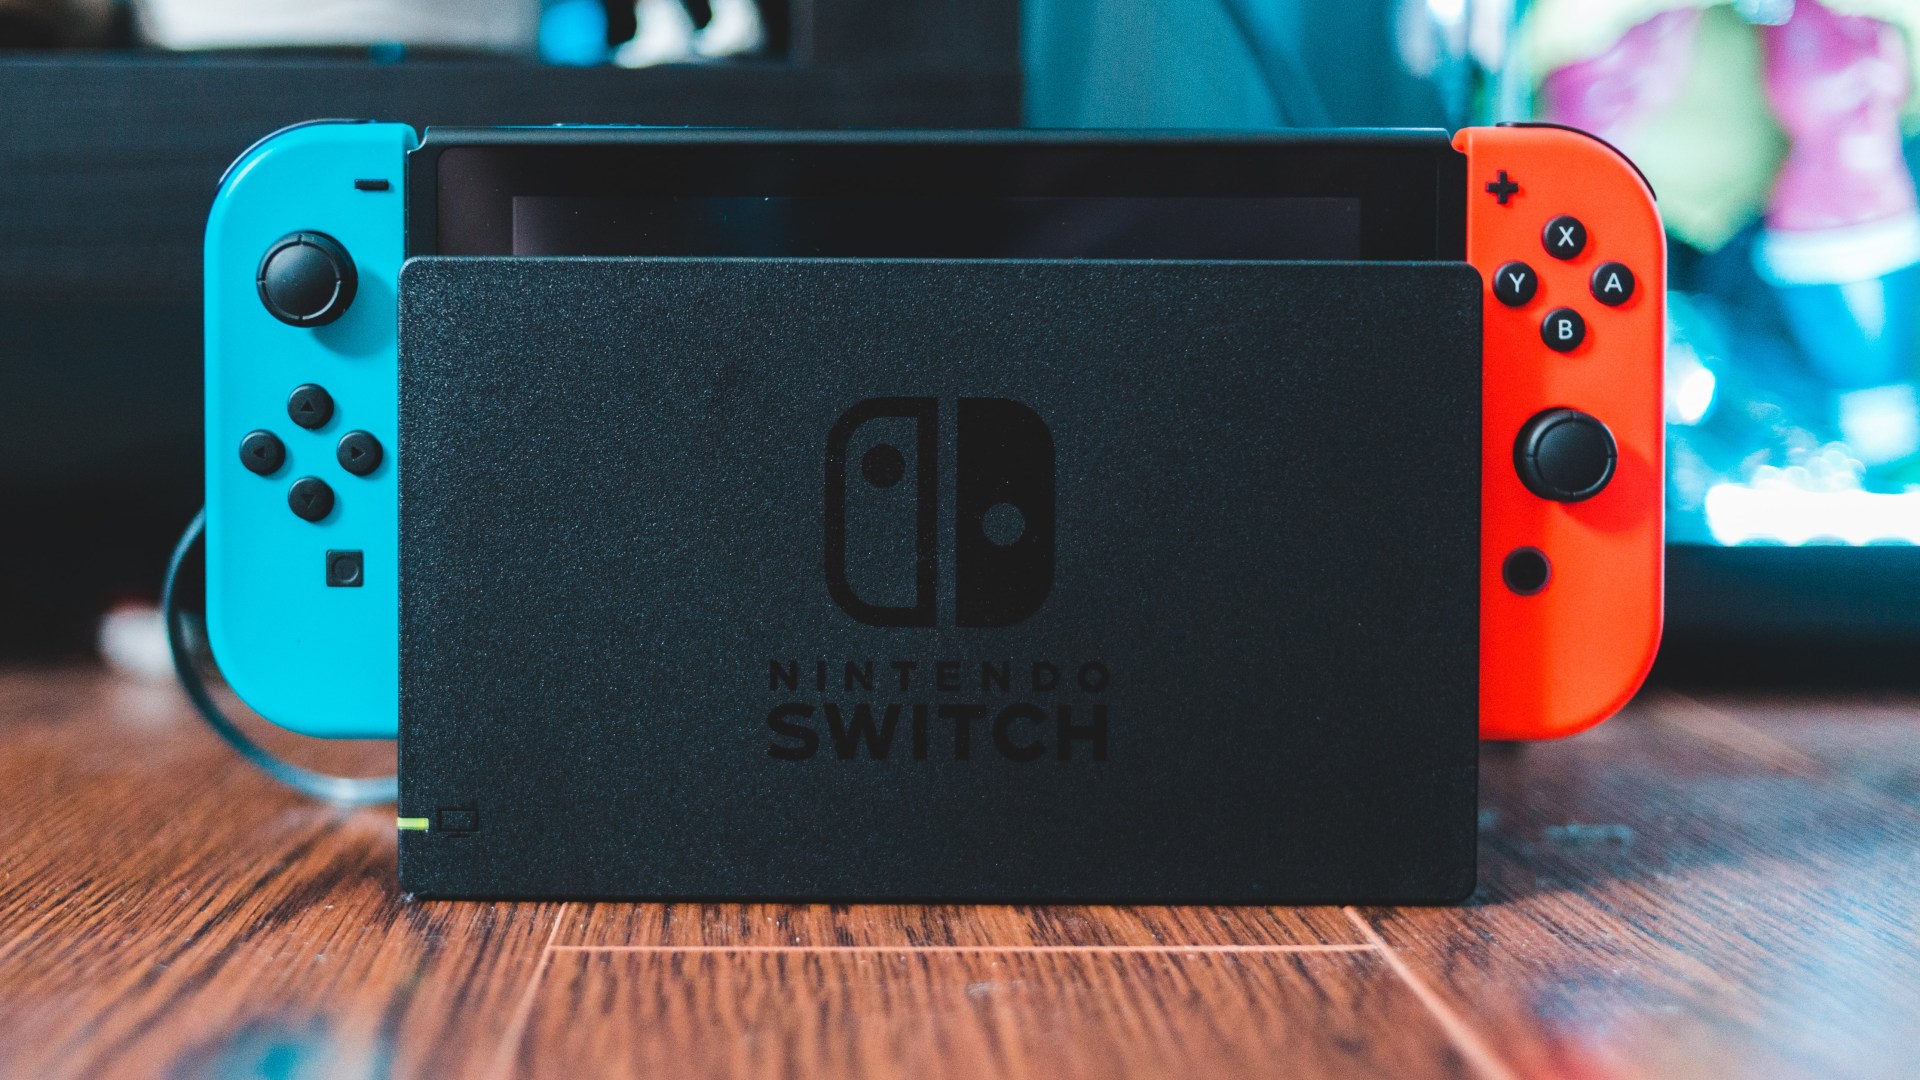 Nintendo Switch game fans rush to purchase games at lowest ever prices in latest sale